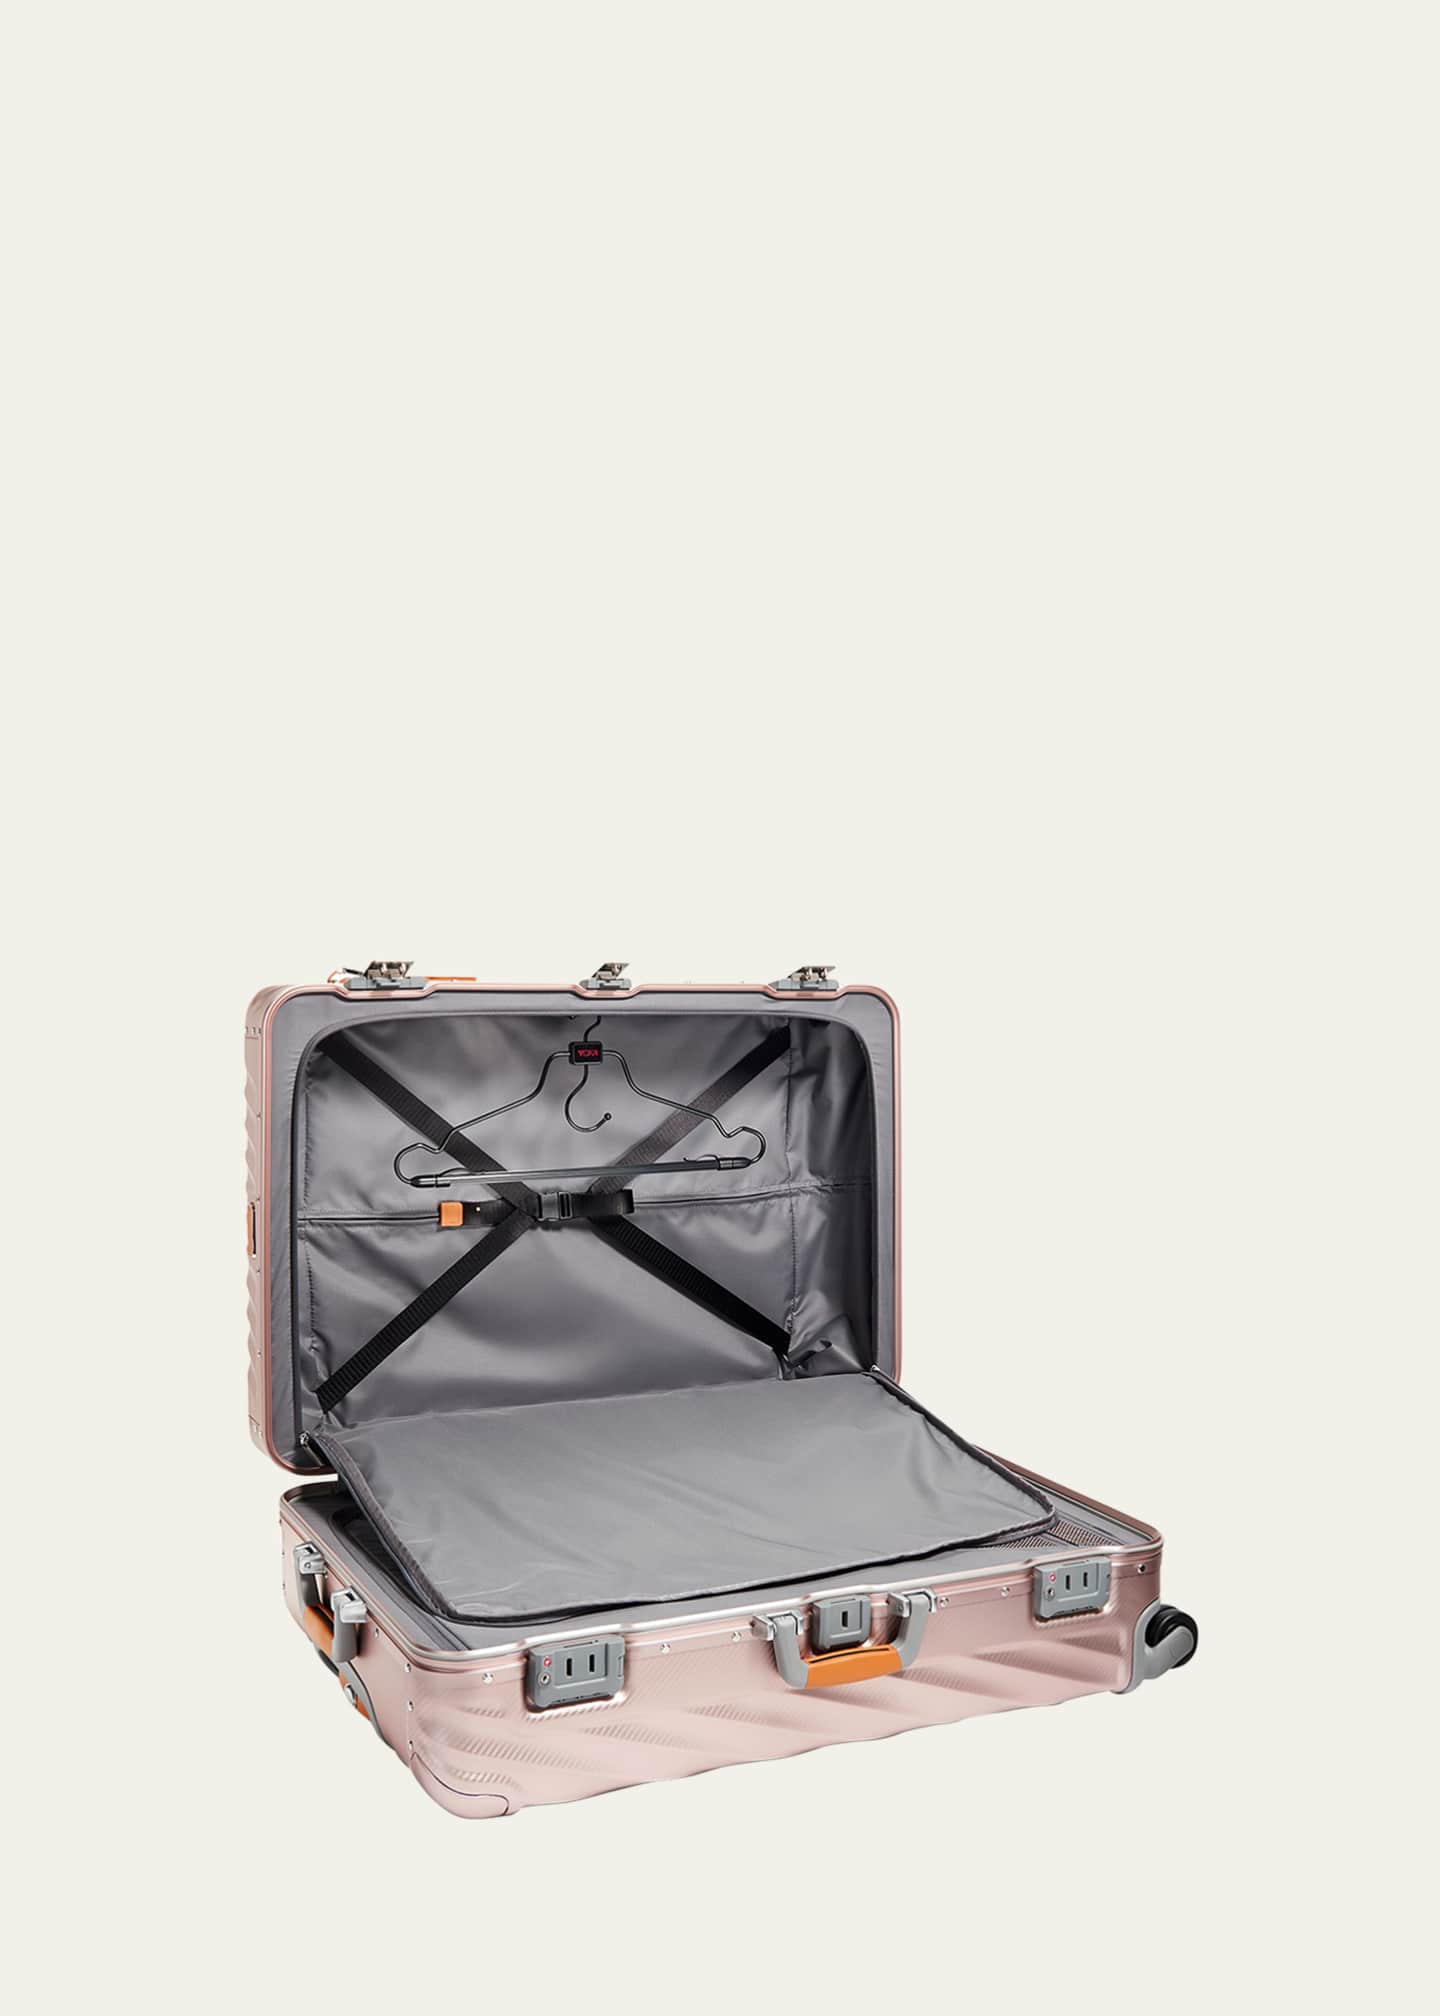 TUMI Extended Trip Packing Case Luggage - Bergdorf Goodman